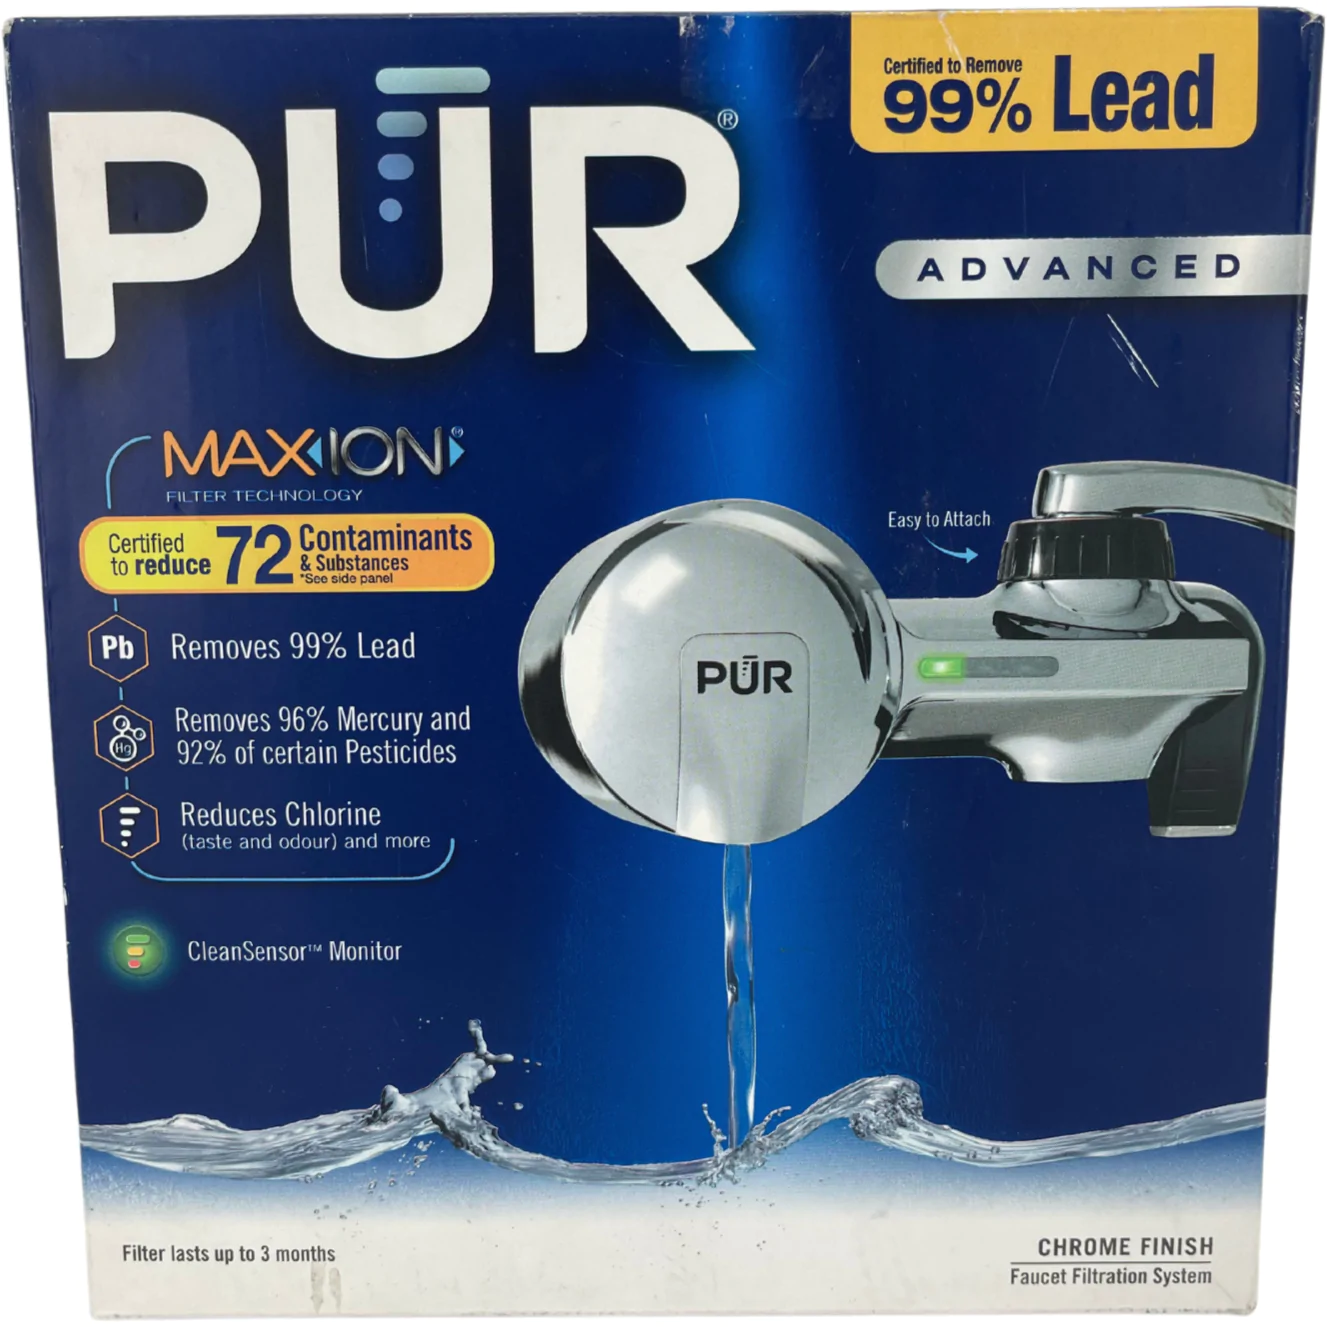 Pur Faucet Water Filtration System / Chrome Finish / CleanSensor Monitor